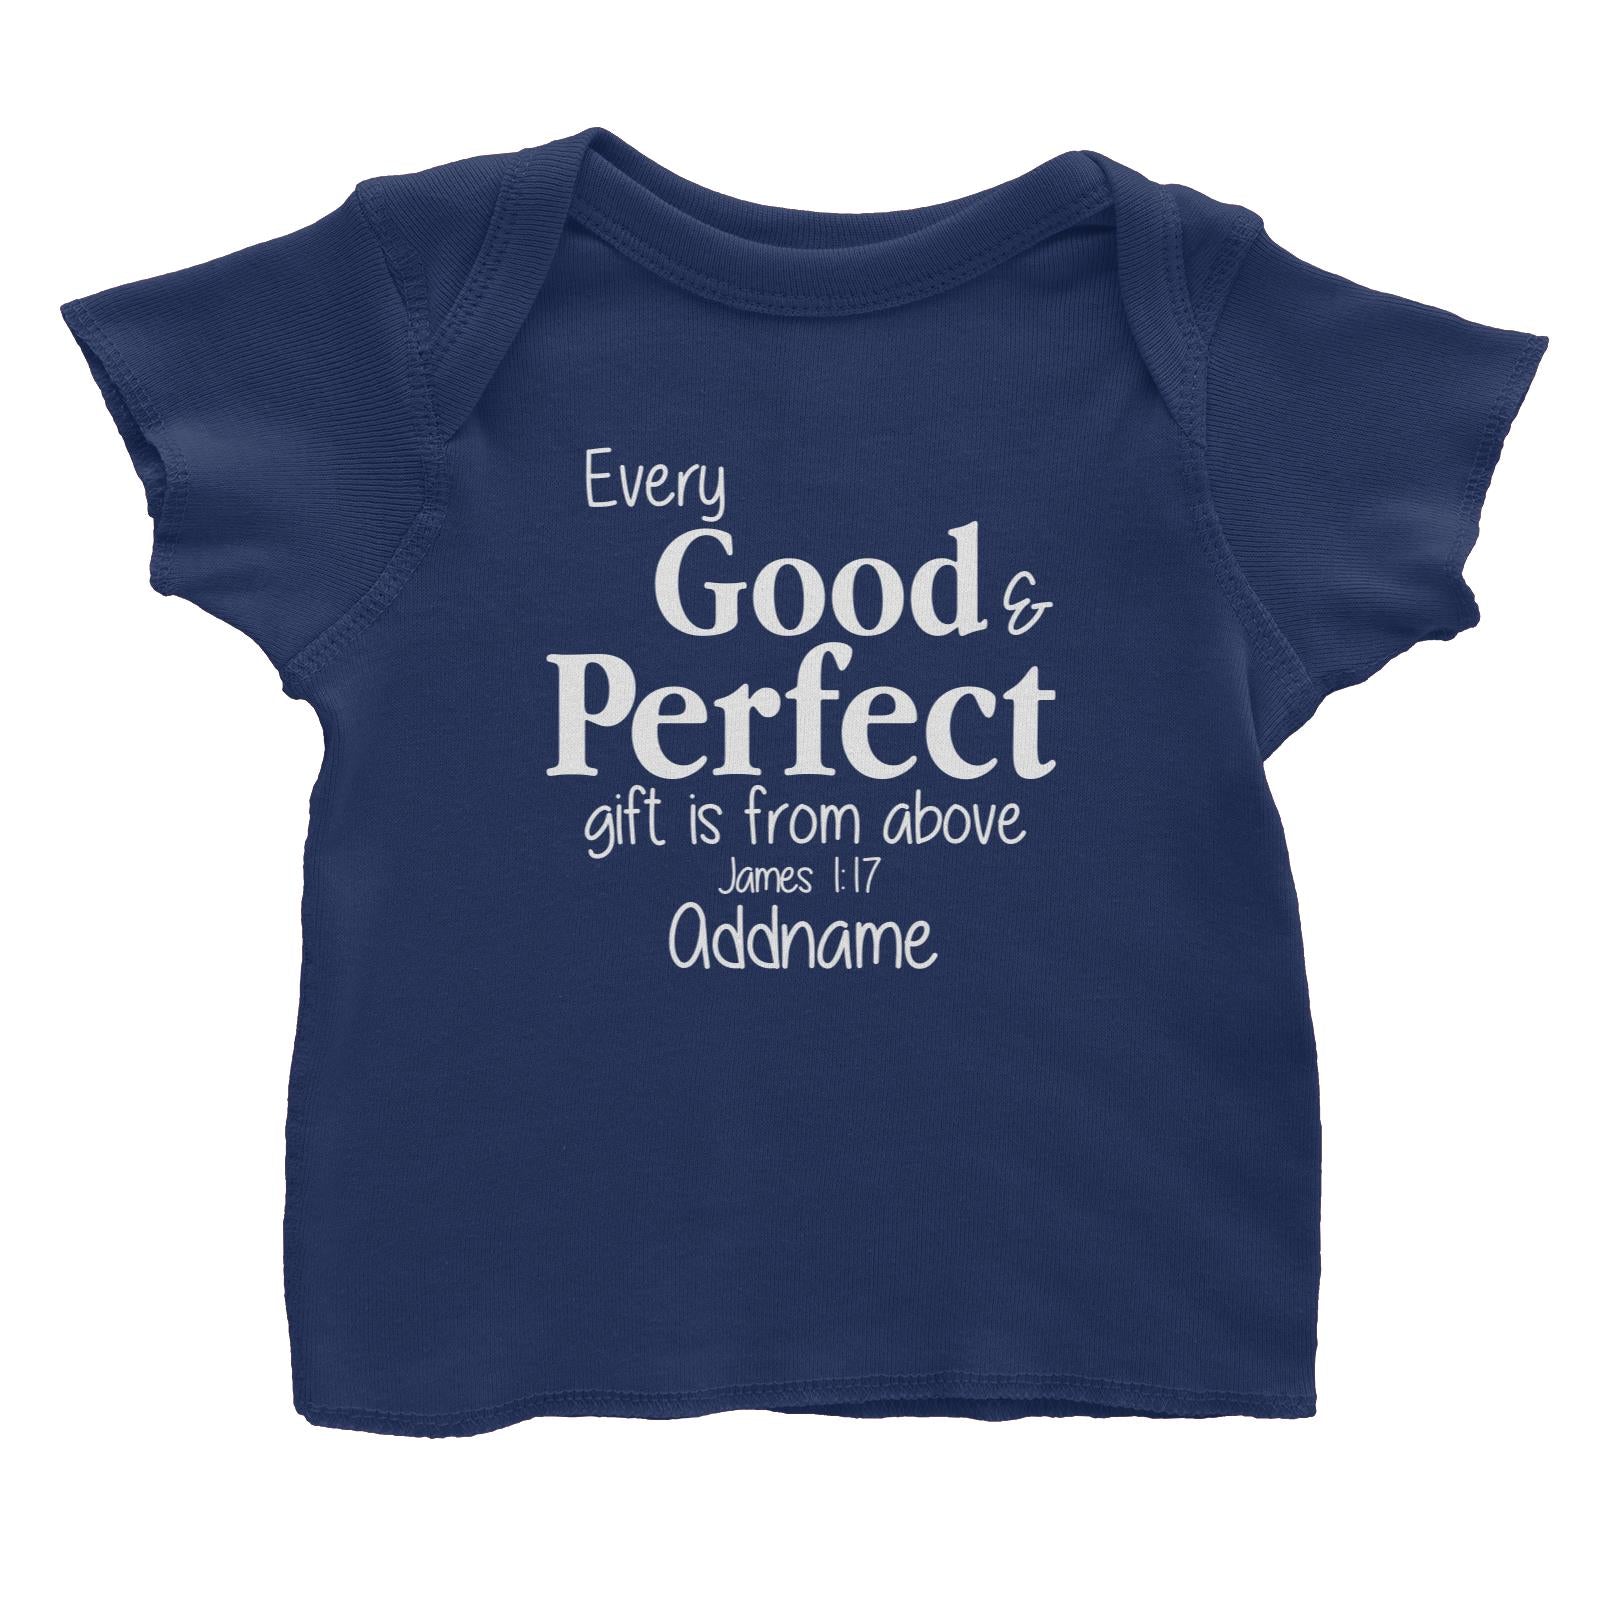 Christ Newborn Every Good and Perfect Gift is from Above James 1.17 Addname Baby T-Shirt